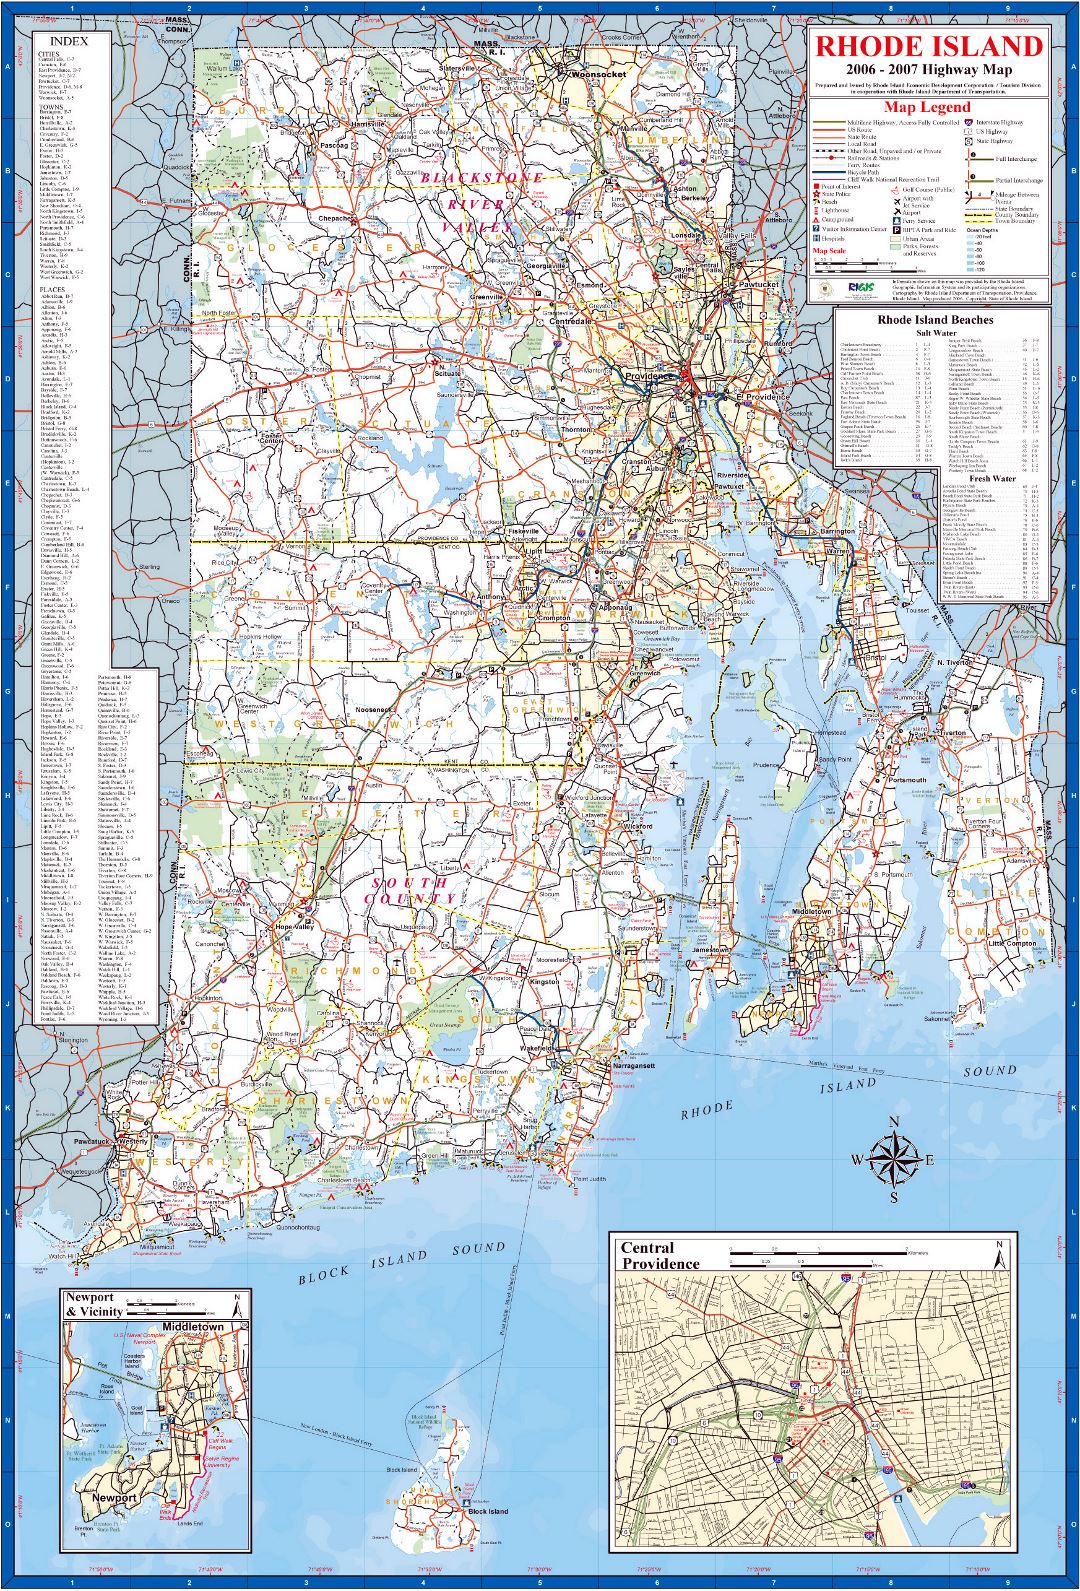 Large highway map of the state of Rhode Island